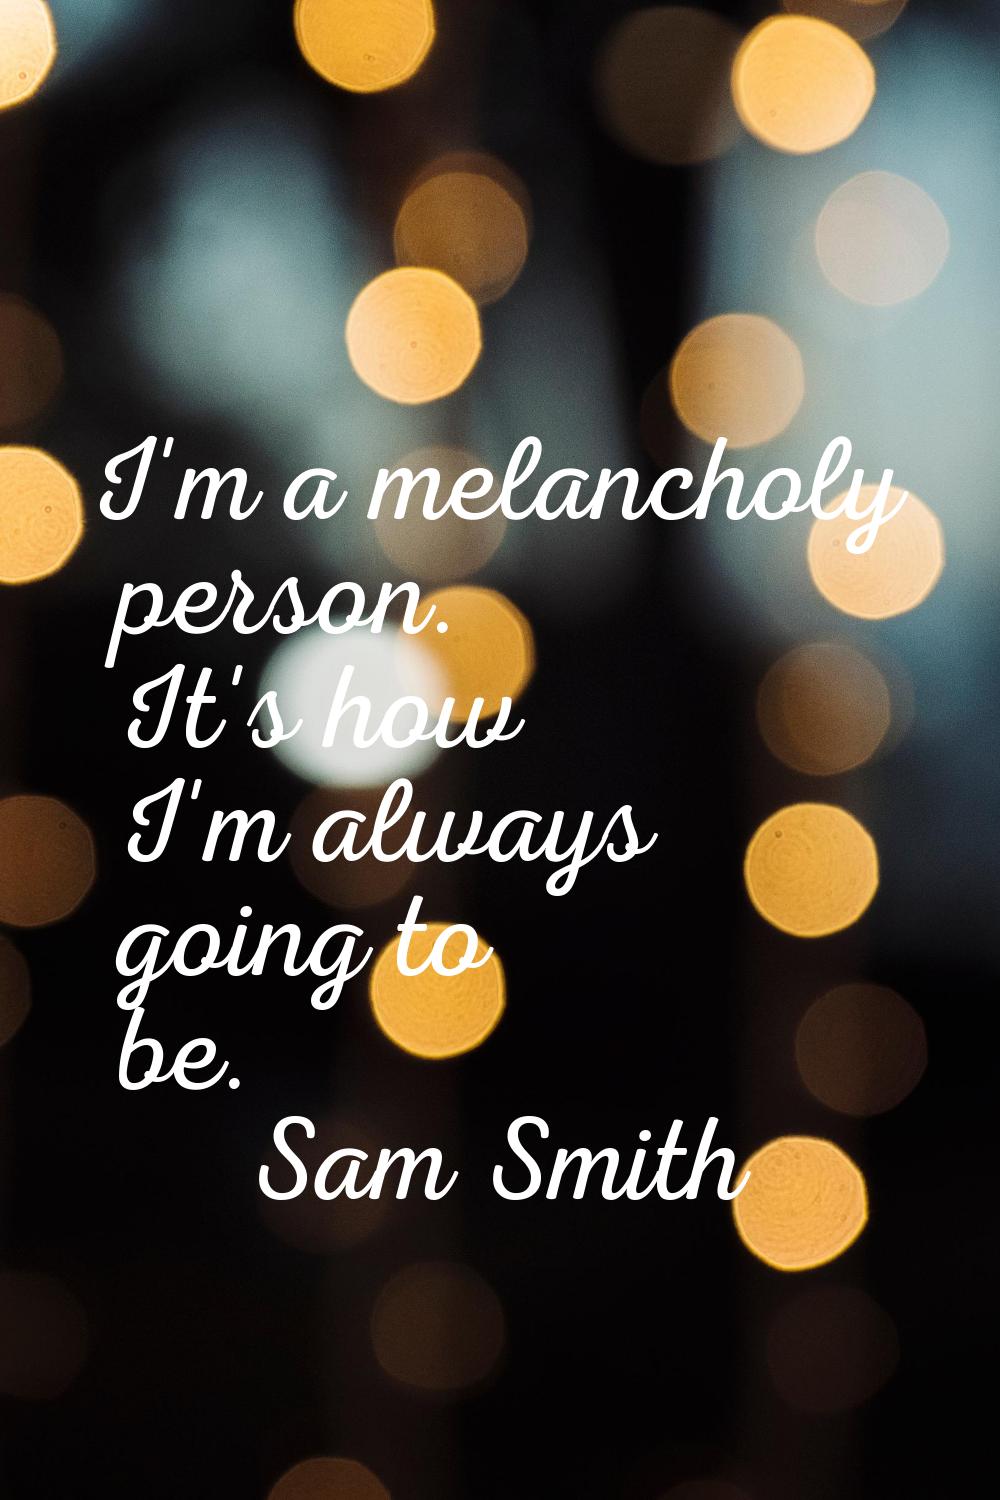 I'm a melancholy person. It's how I'm always going to be.